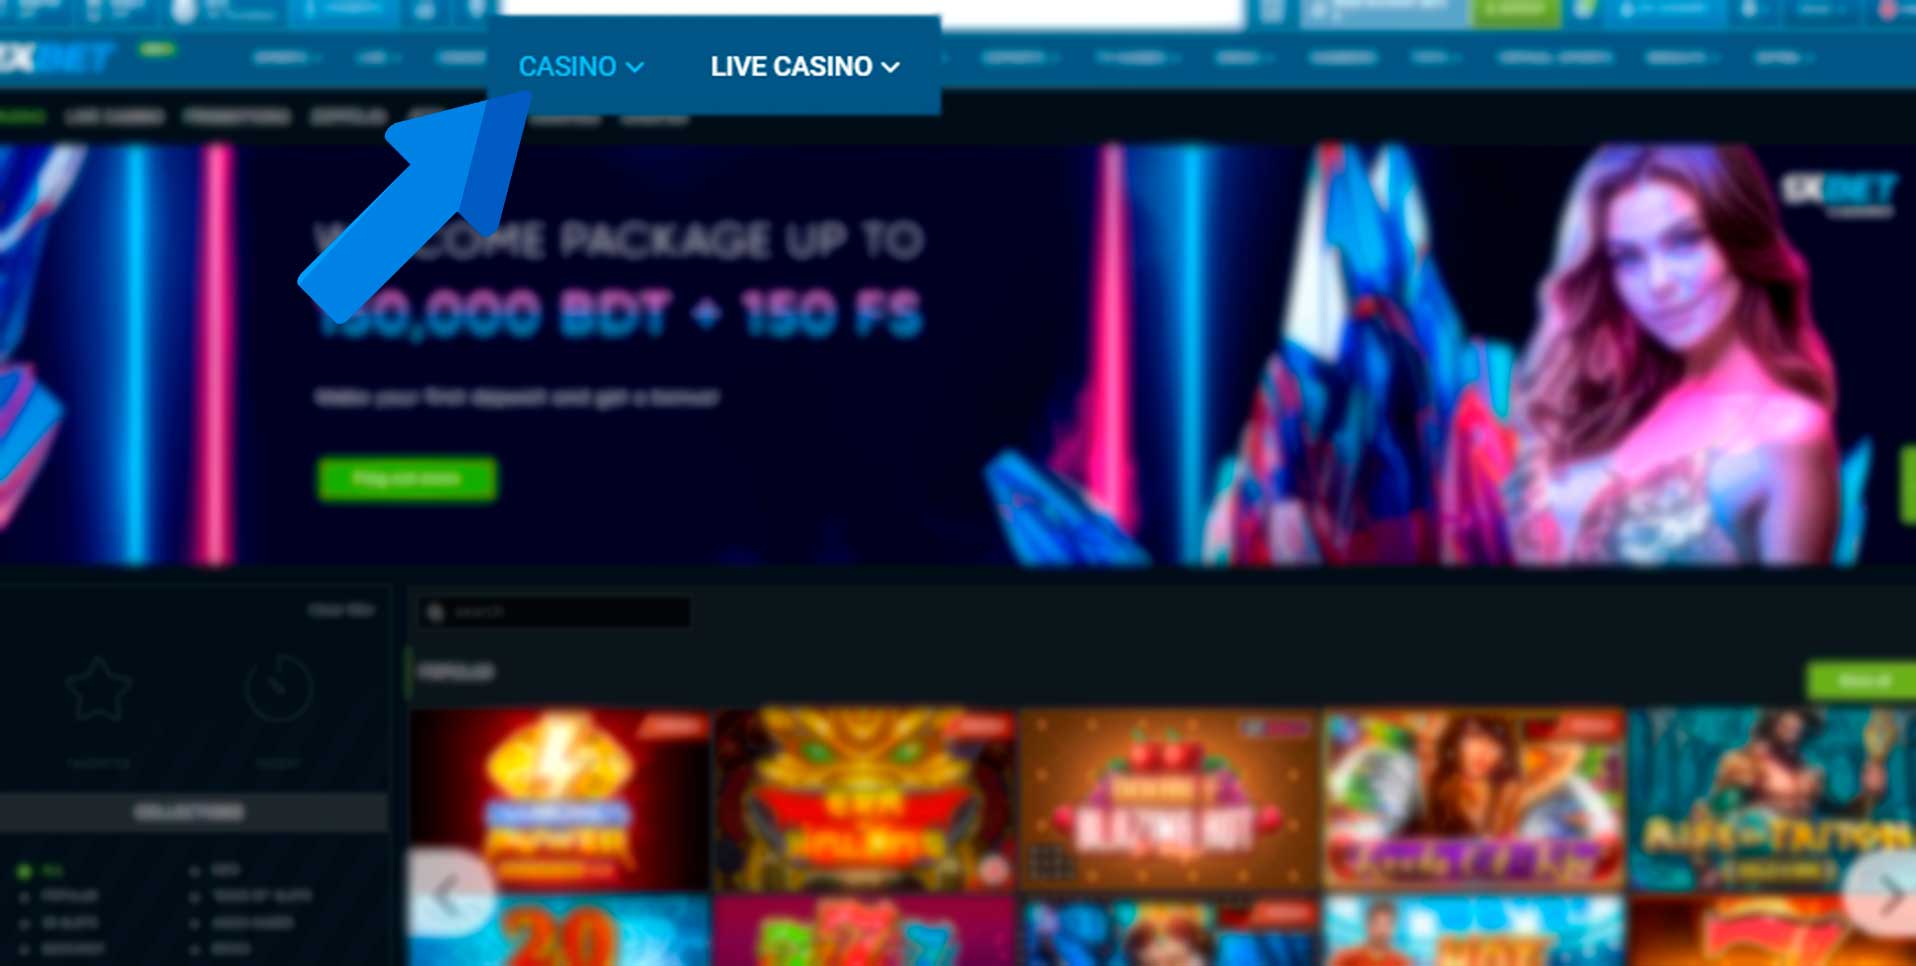 Go to a casino or a live casino to play at